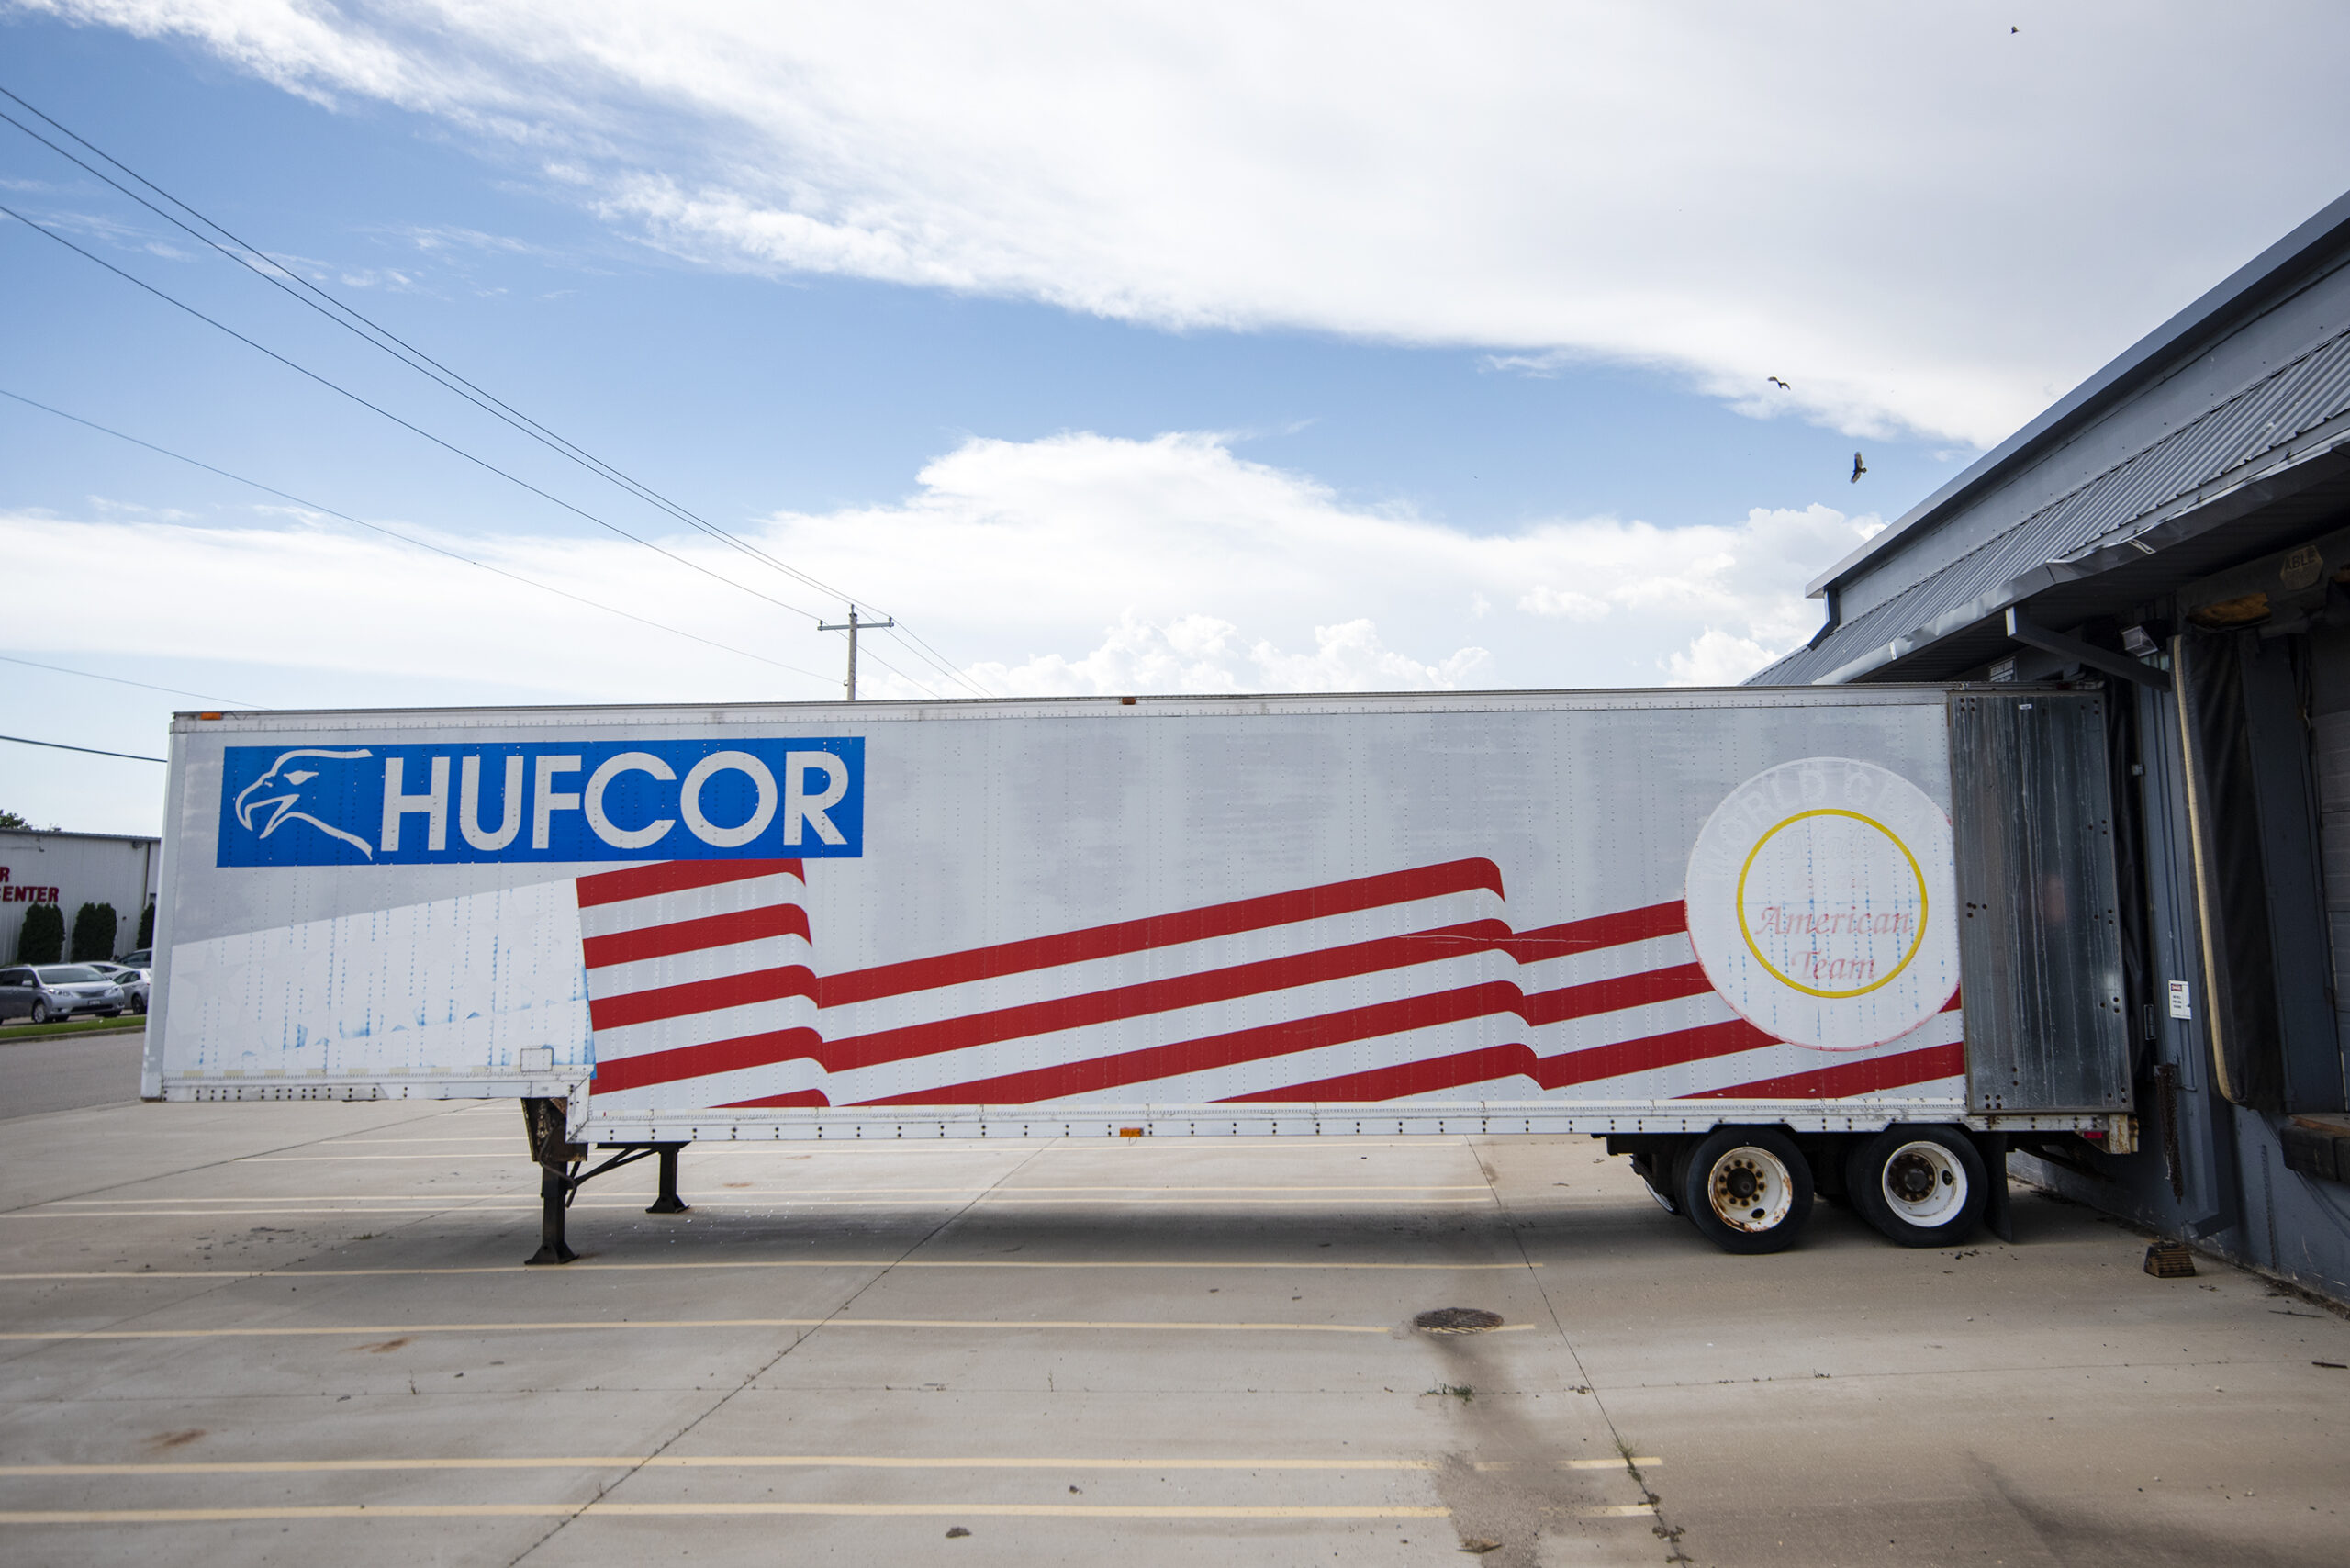 A trailer with red stripes says "HUFCOR" on the side.